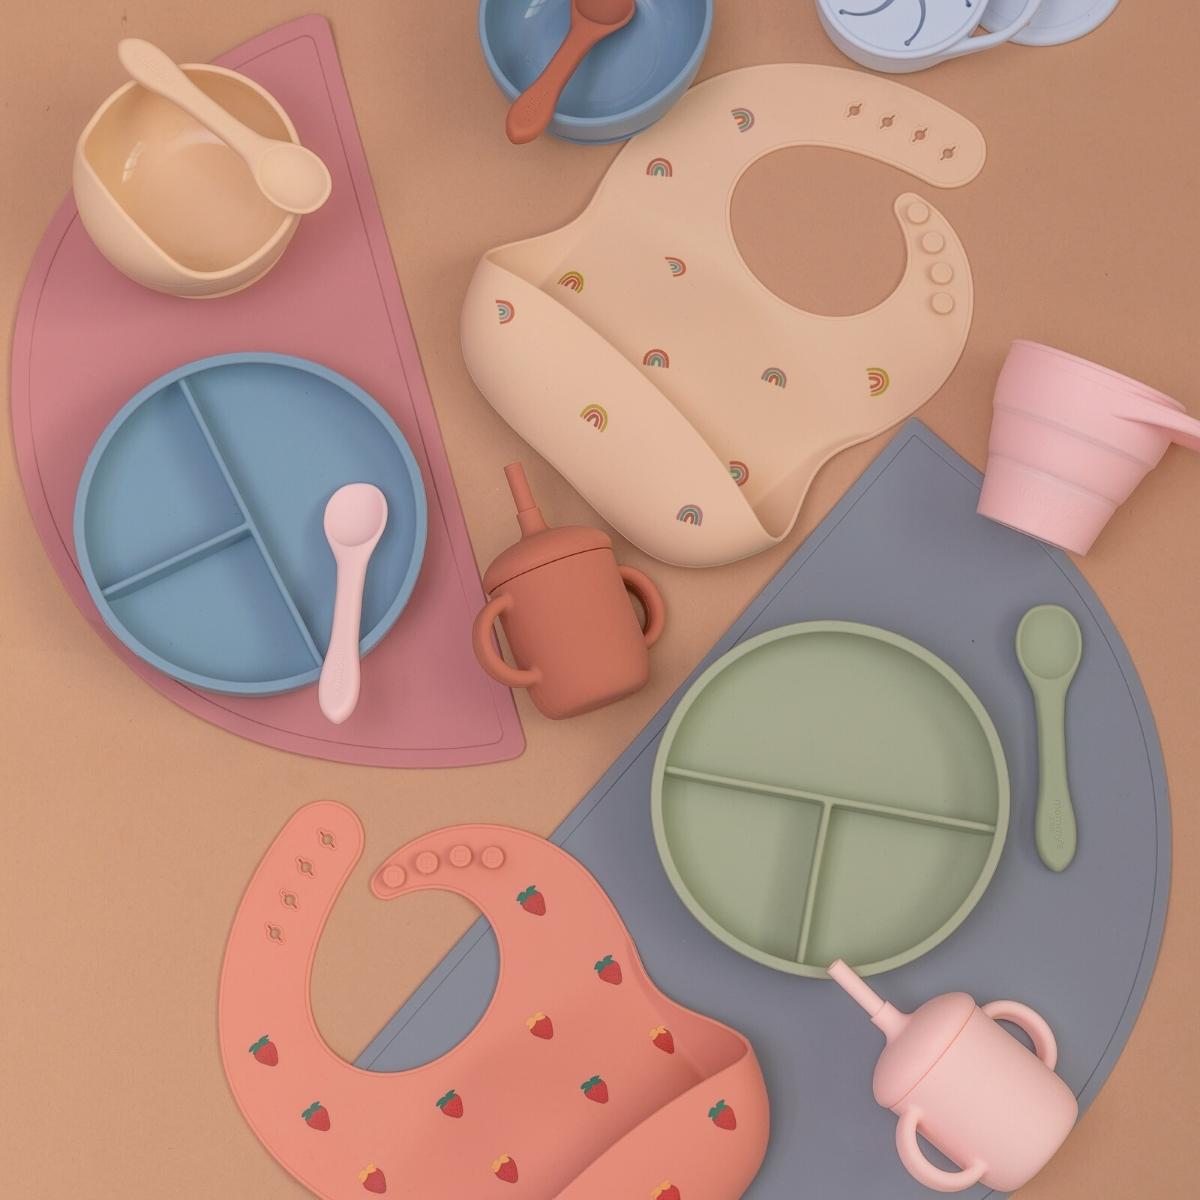 Foldable Snack Cup (Blush)